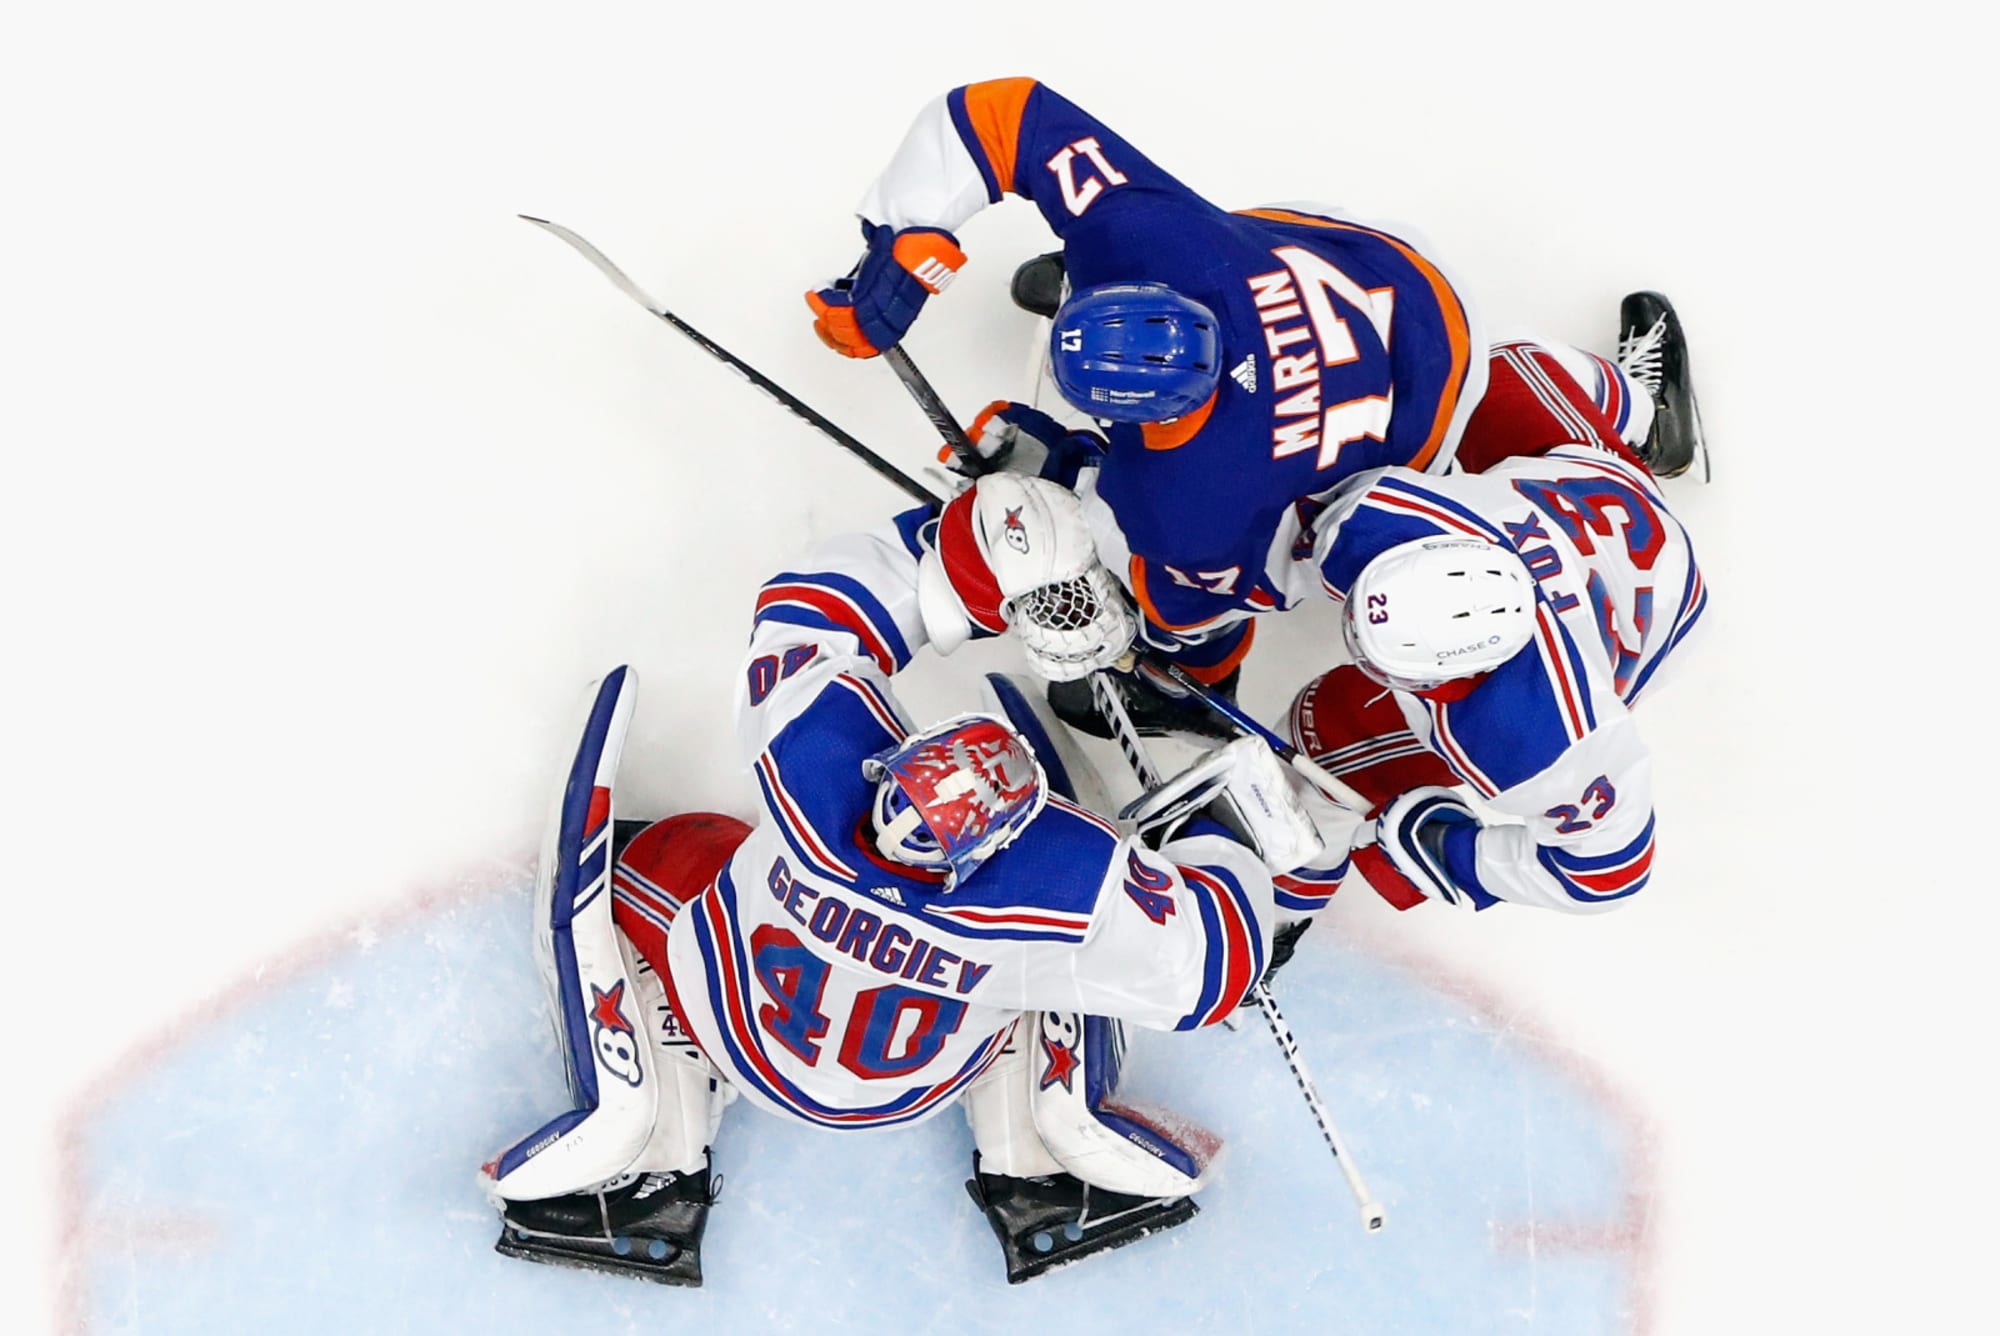 In a 41 win, the New York Rangers play their best to beat the best